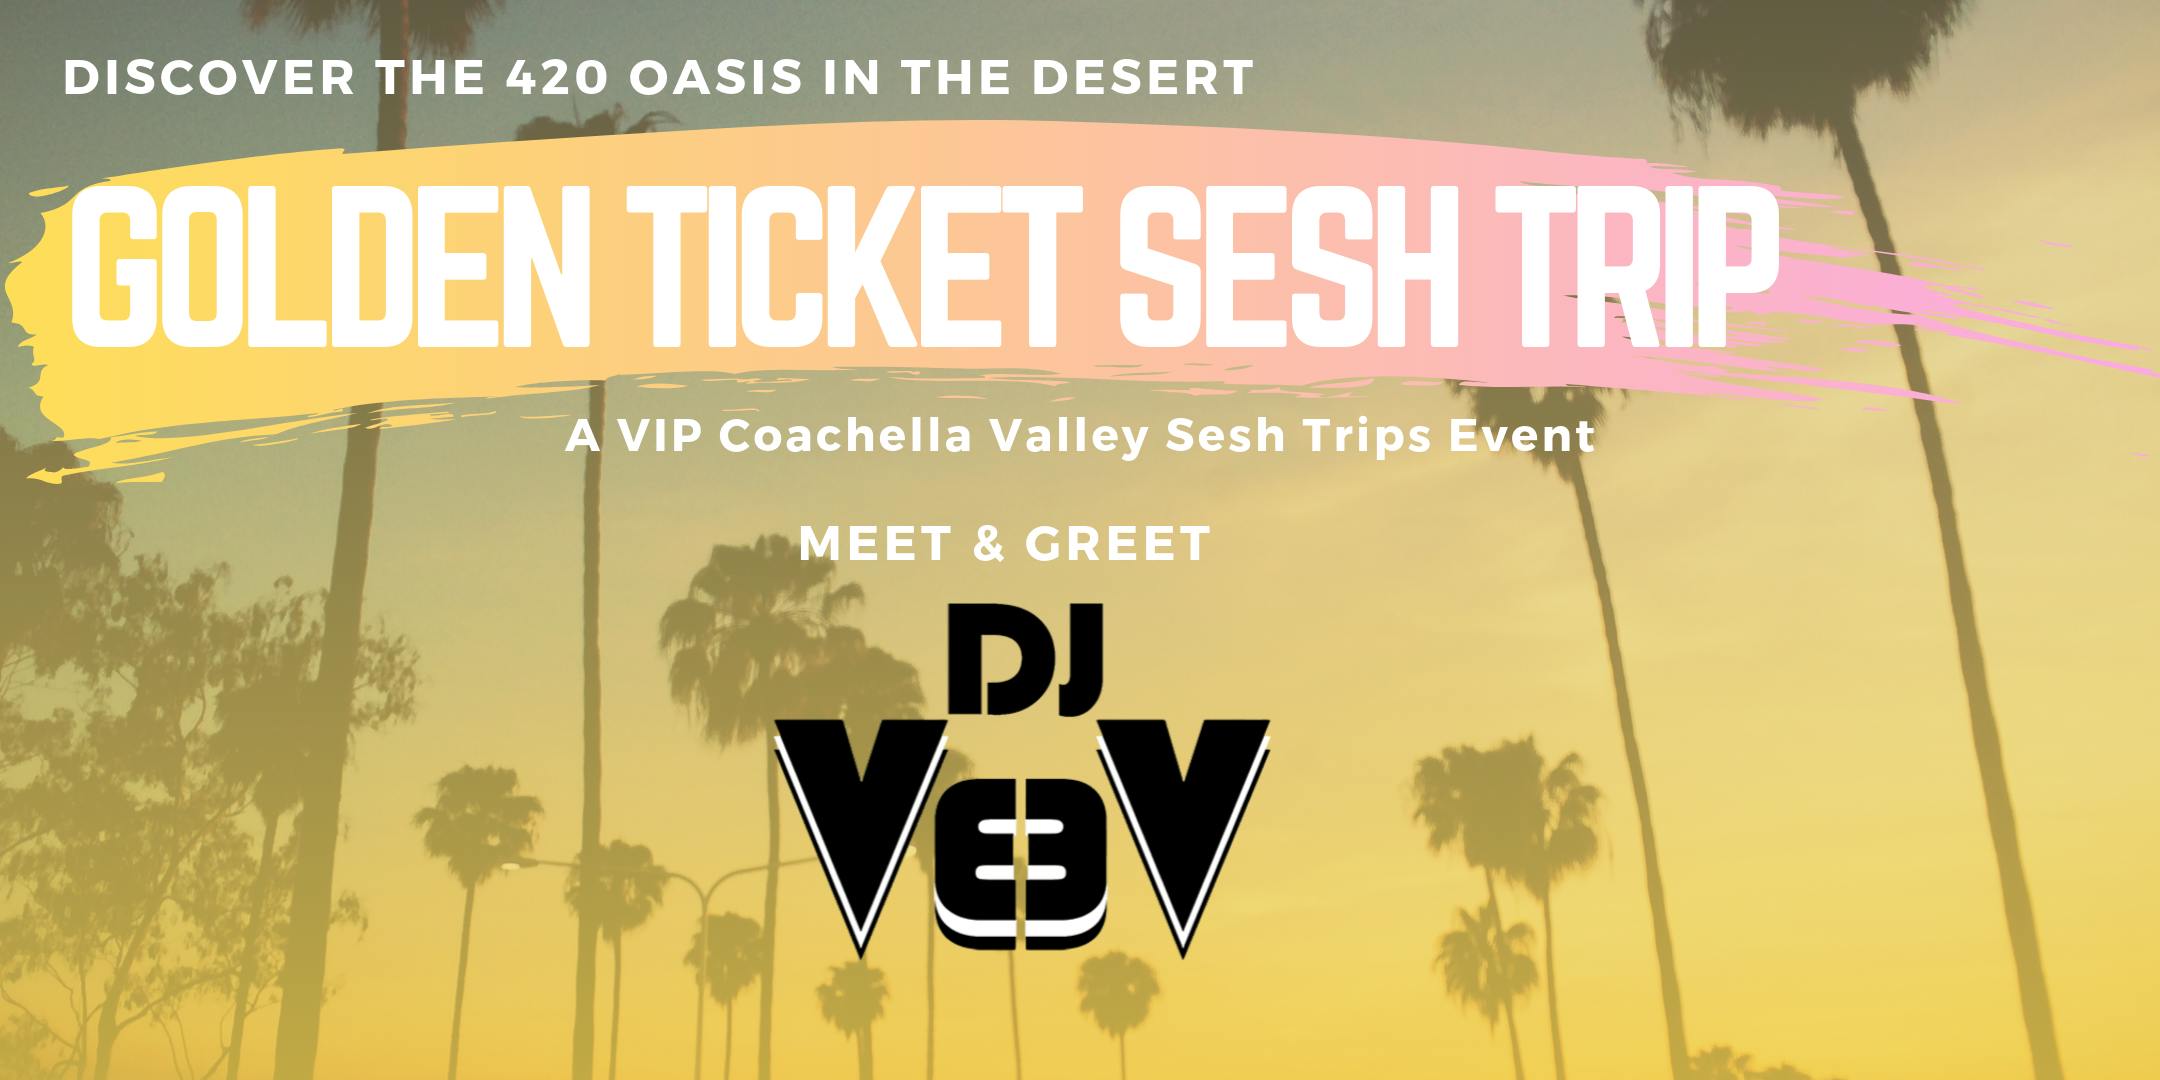 Cannabis Sesh Trip - Self-Guided Tour of the 420 Oasis in the Desert